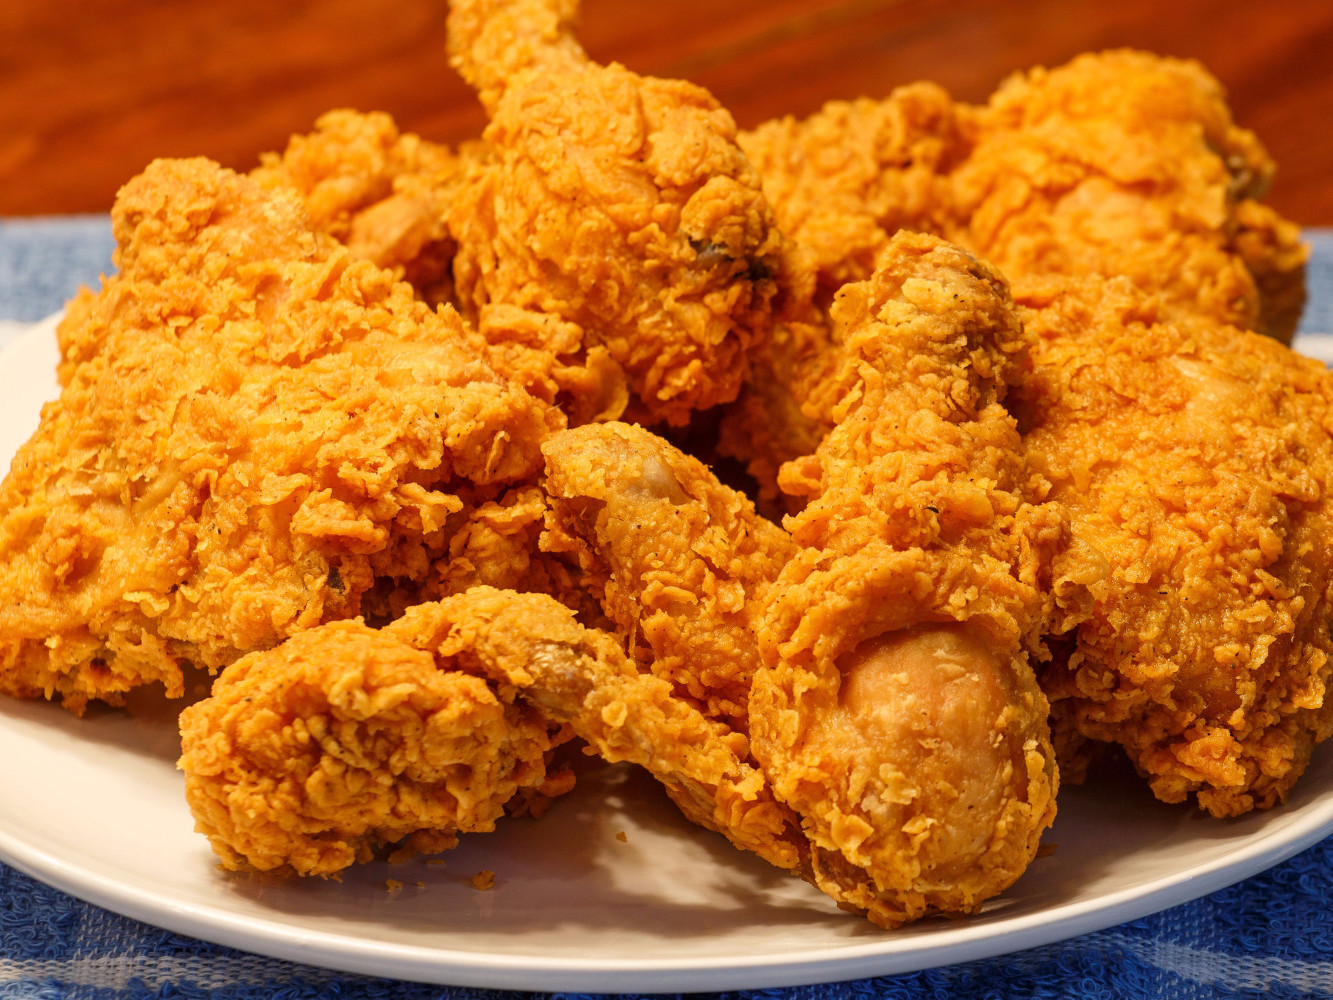 Making Fried Chicken
 How to make the crispiest fried chicken Business Insider